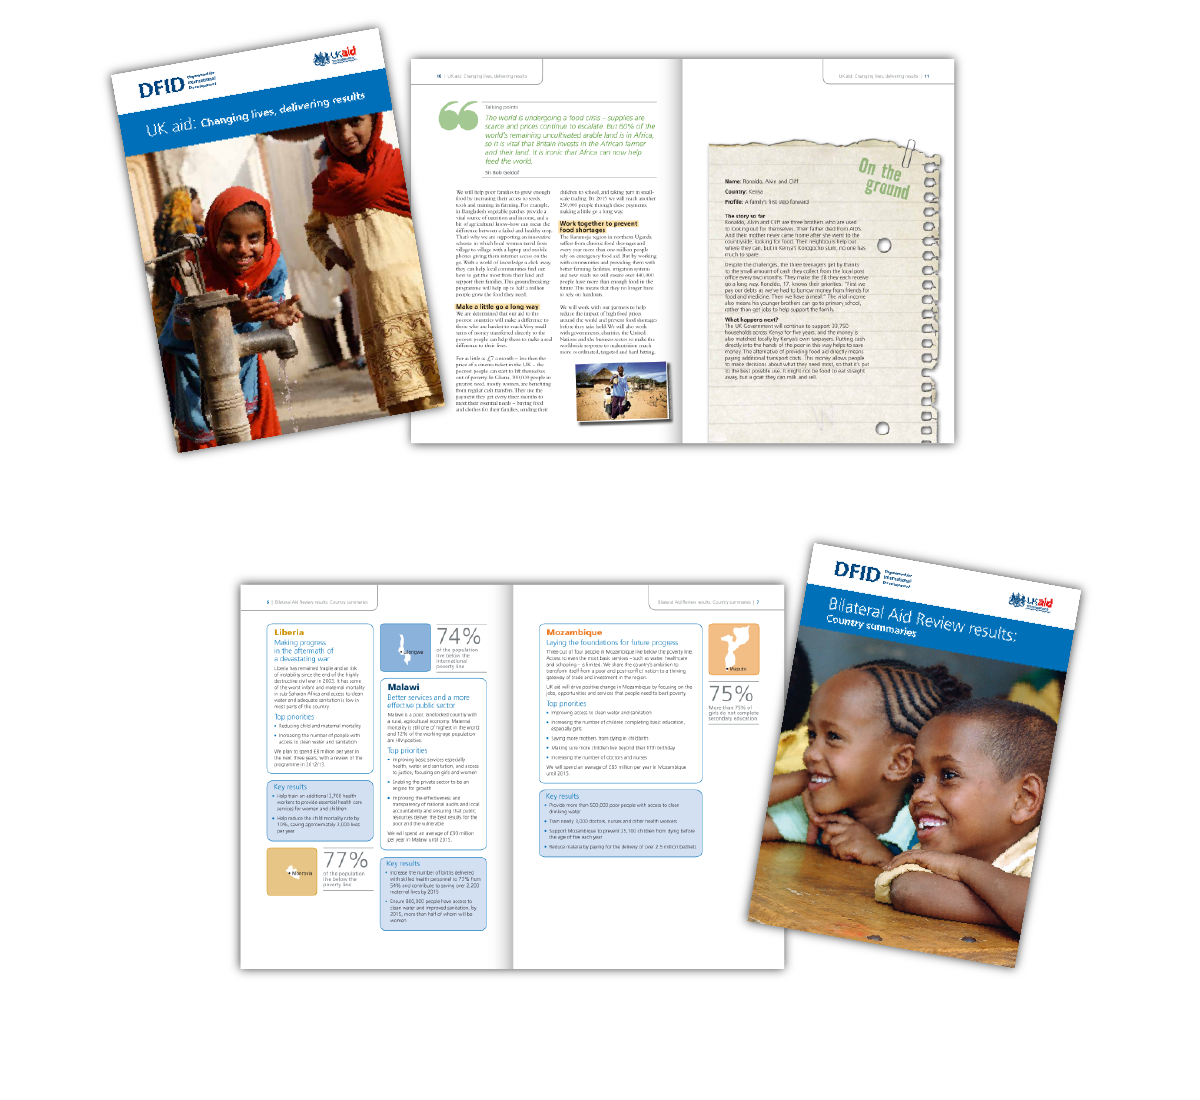 DFID UK:Aid Annual Report and Bilateeral Aid Review